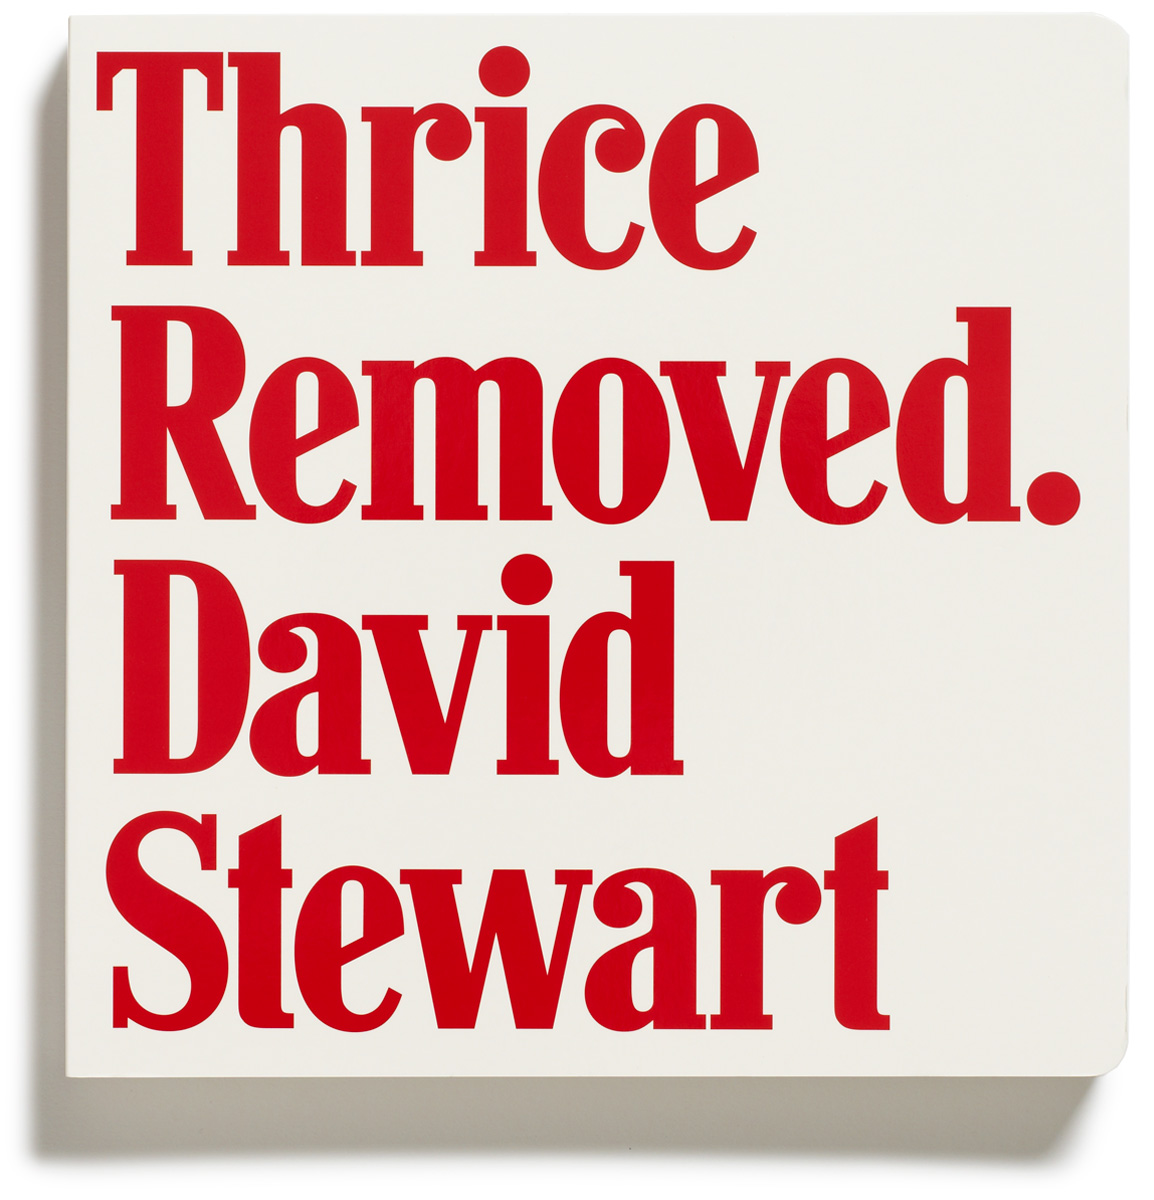 Browns Editions, Browns Editions Publishing, Browns Editions Books, Browns Editions David Stewart, Browns Editions Thrice Removed, Browns Editions David Stewart Thrice Removed